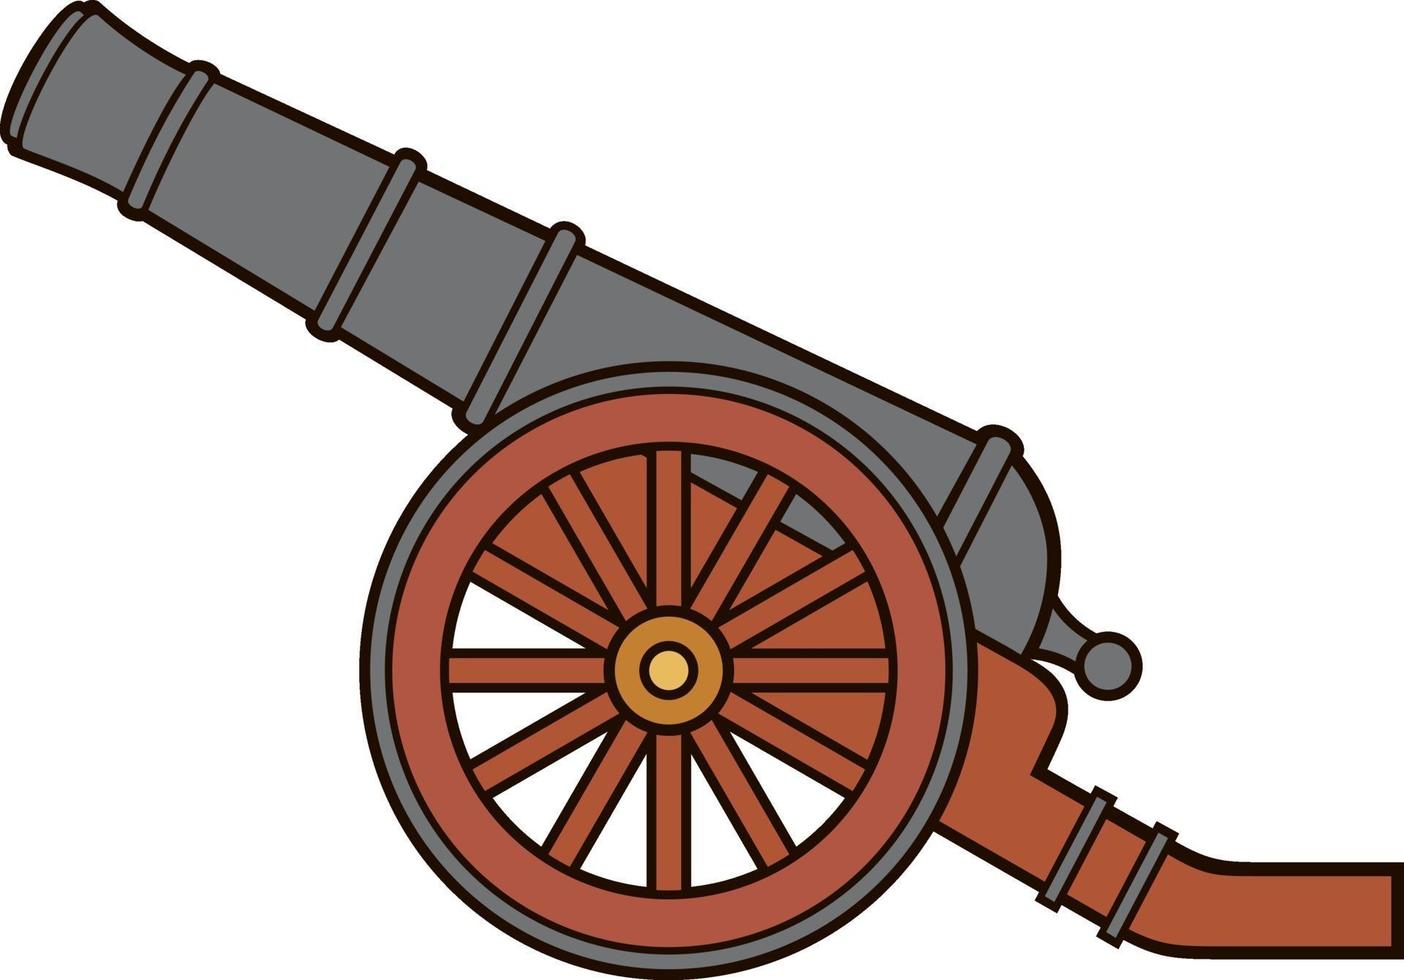 Ancient or pirate cannon vector